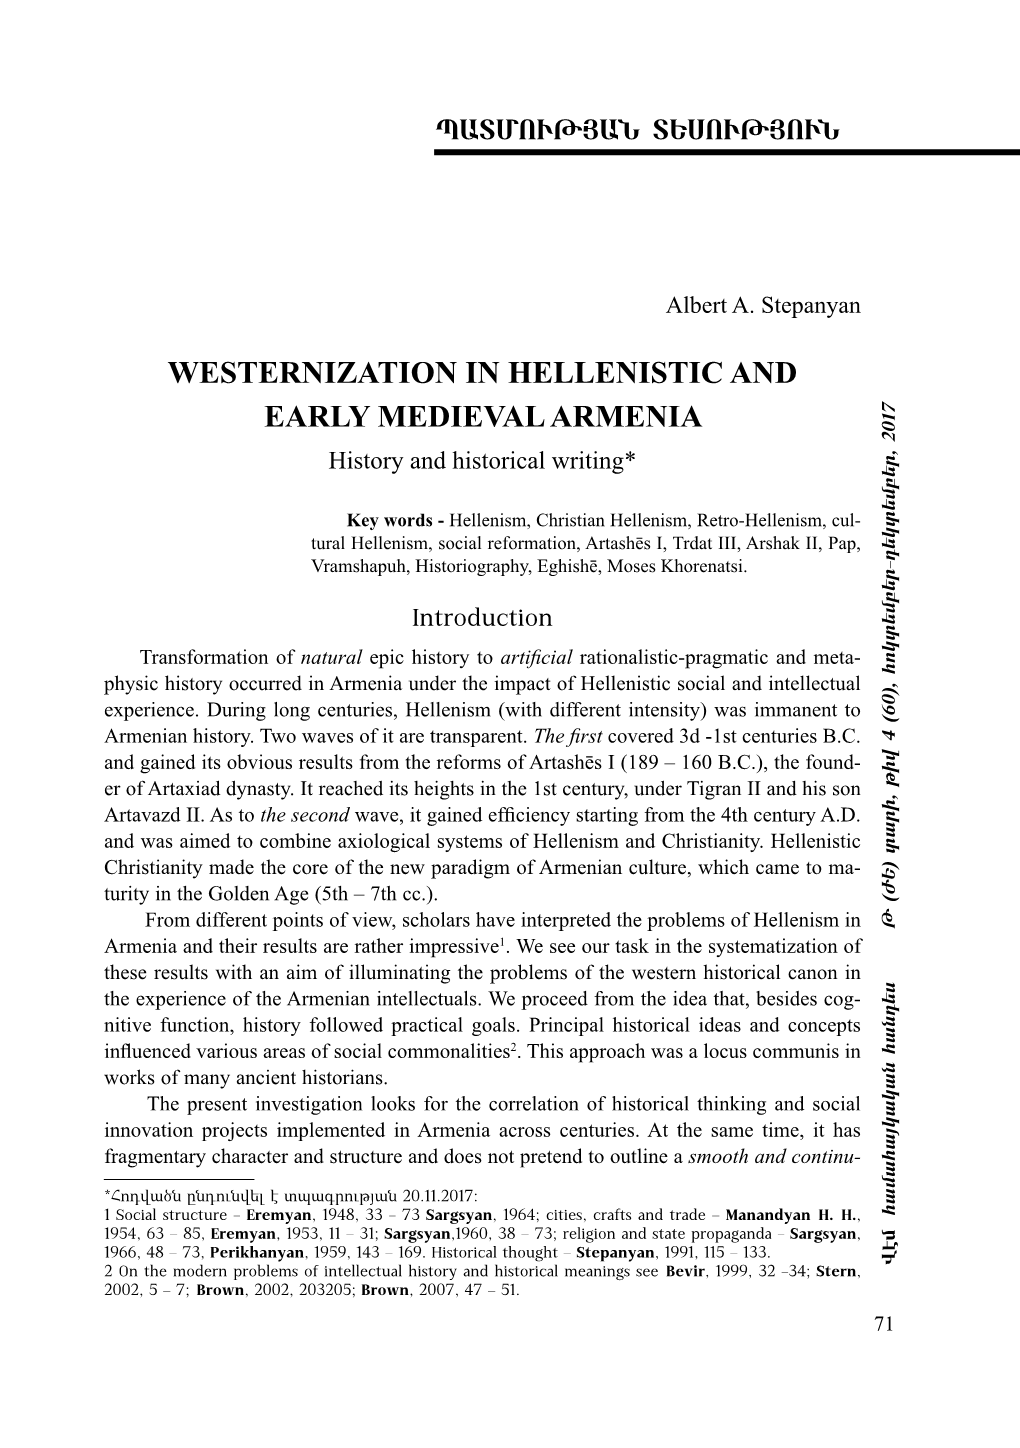 WESTERNIZATION in HELLENISTIC and EARLY MEDIEVAL ARMENIA History and Historical Writing*